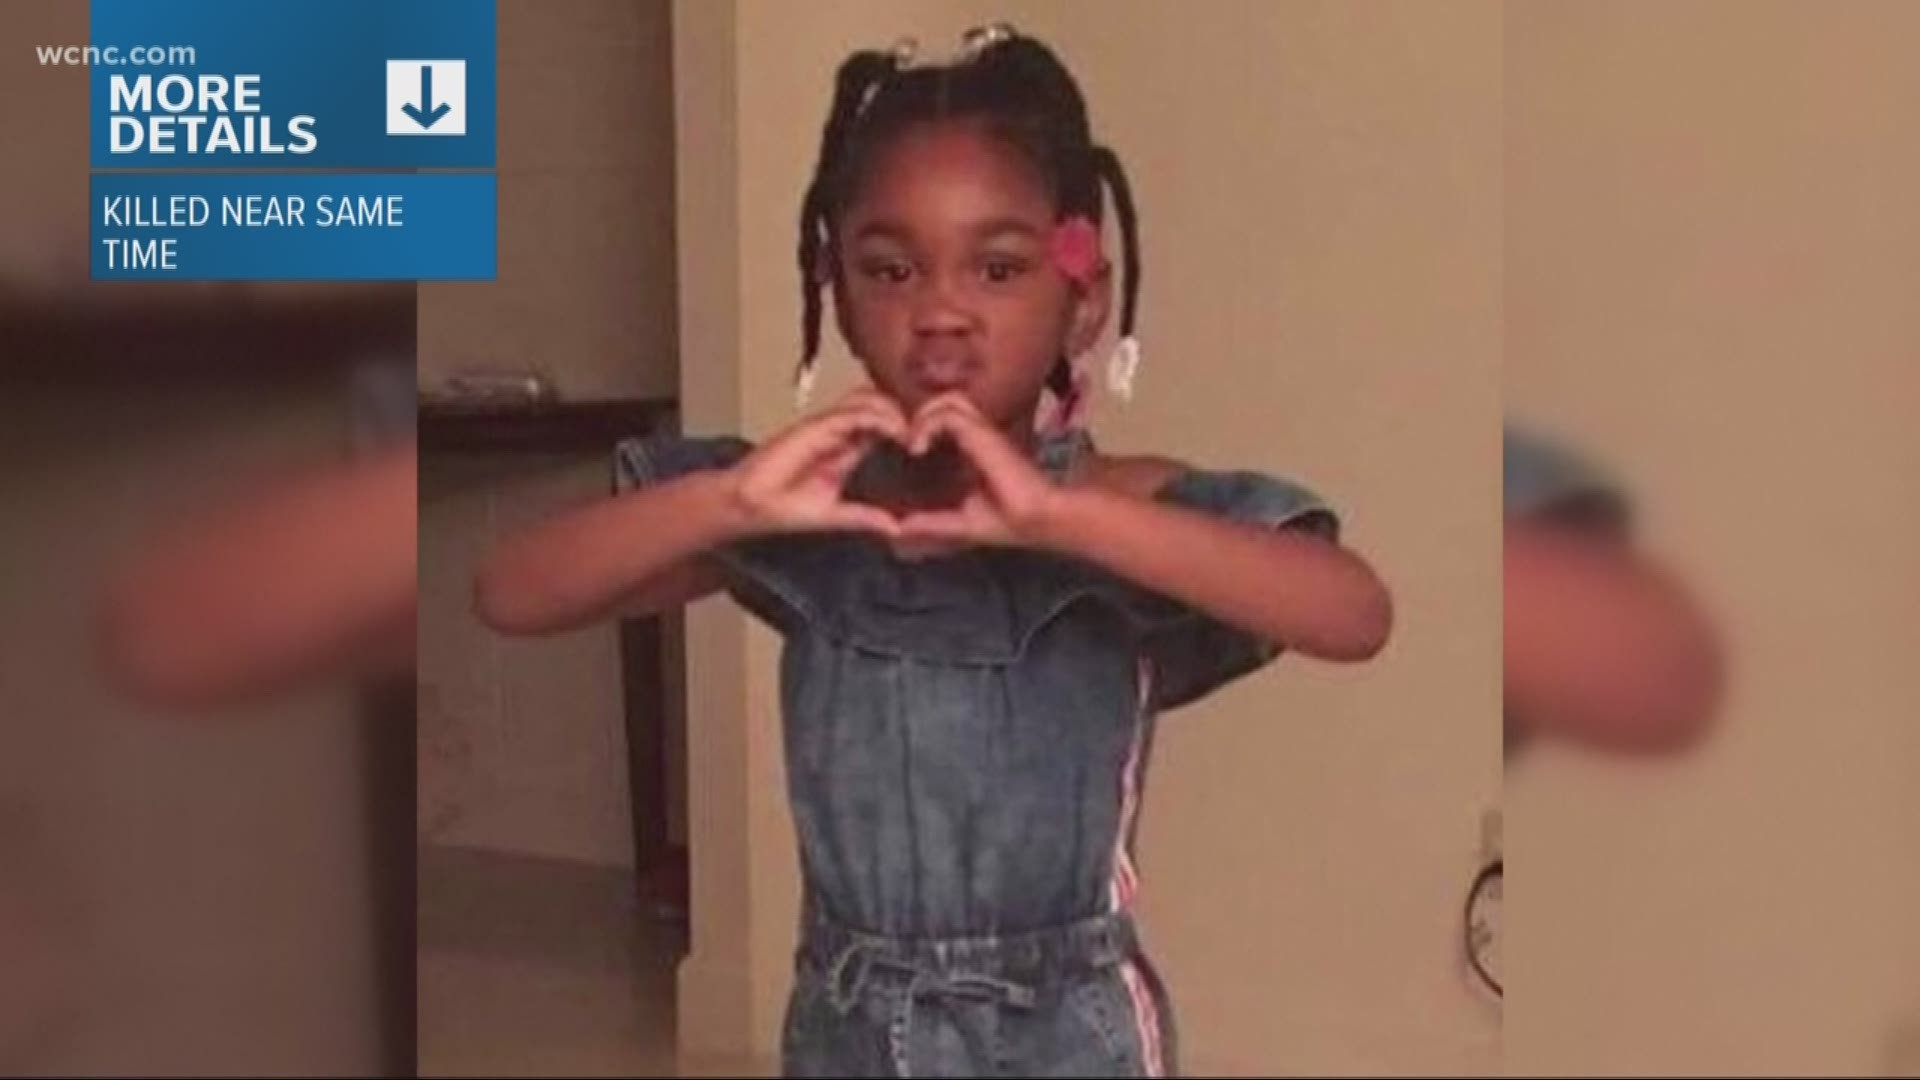 The family of Neveah Adams hasn't given up hope that she's alive despite detectives saying they believe the 5-year-old was killed and thrown into a dumpster outside her mother's Sumter, South Carolina home.